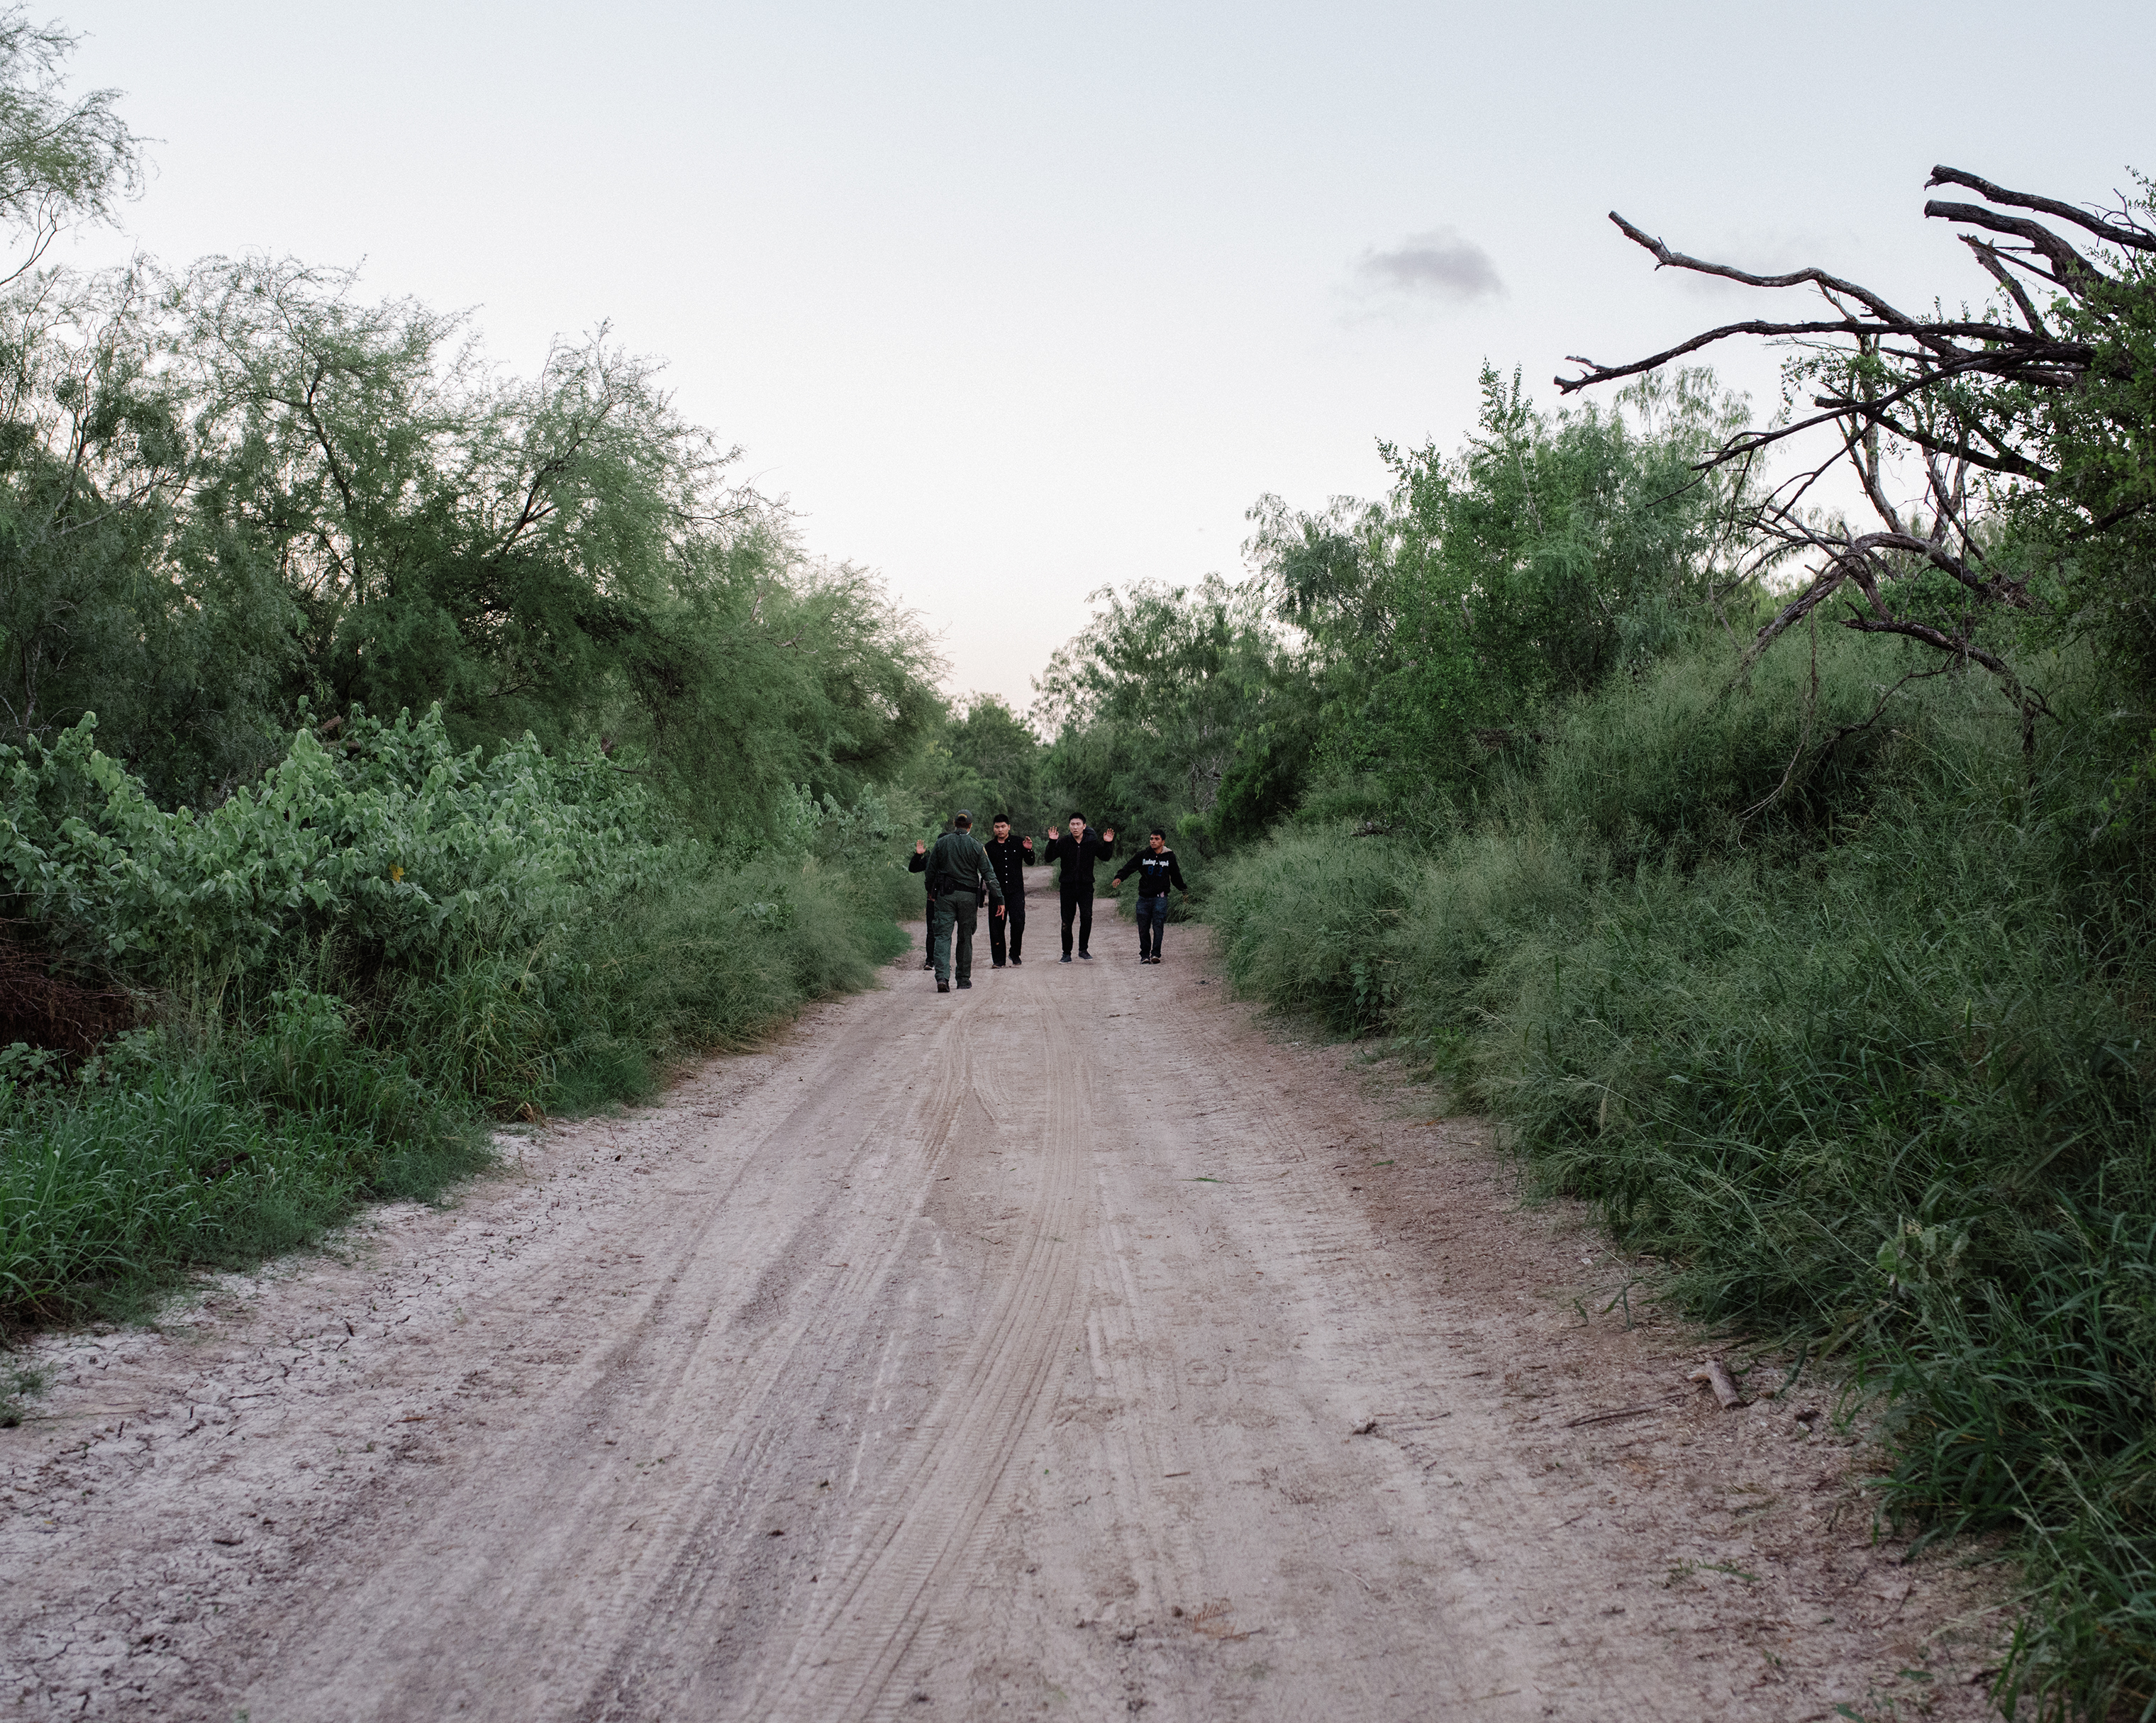 Migrants who crossed the Rio Grande into McAllen are approached by a border officer on Sept. 25. (John Francis Peters for TIME)